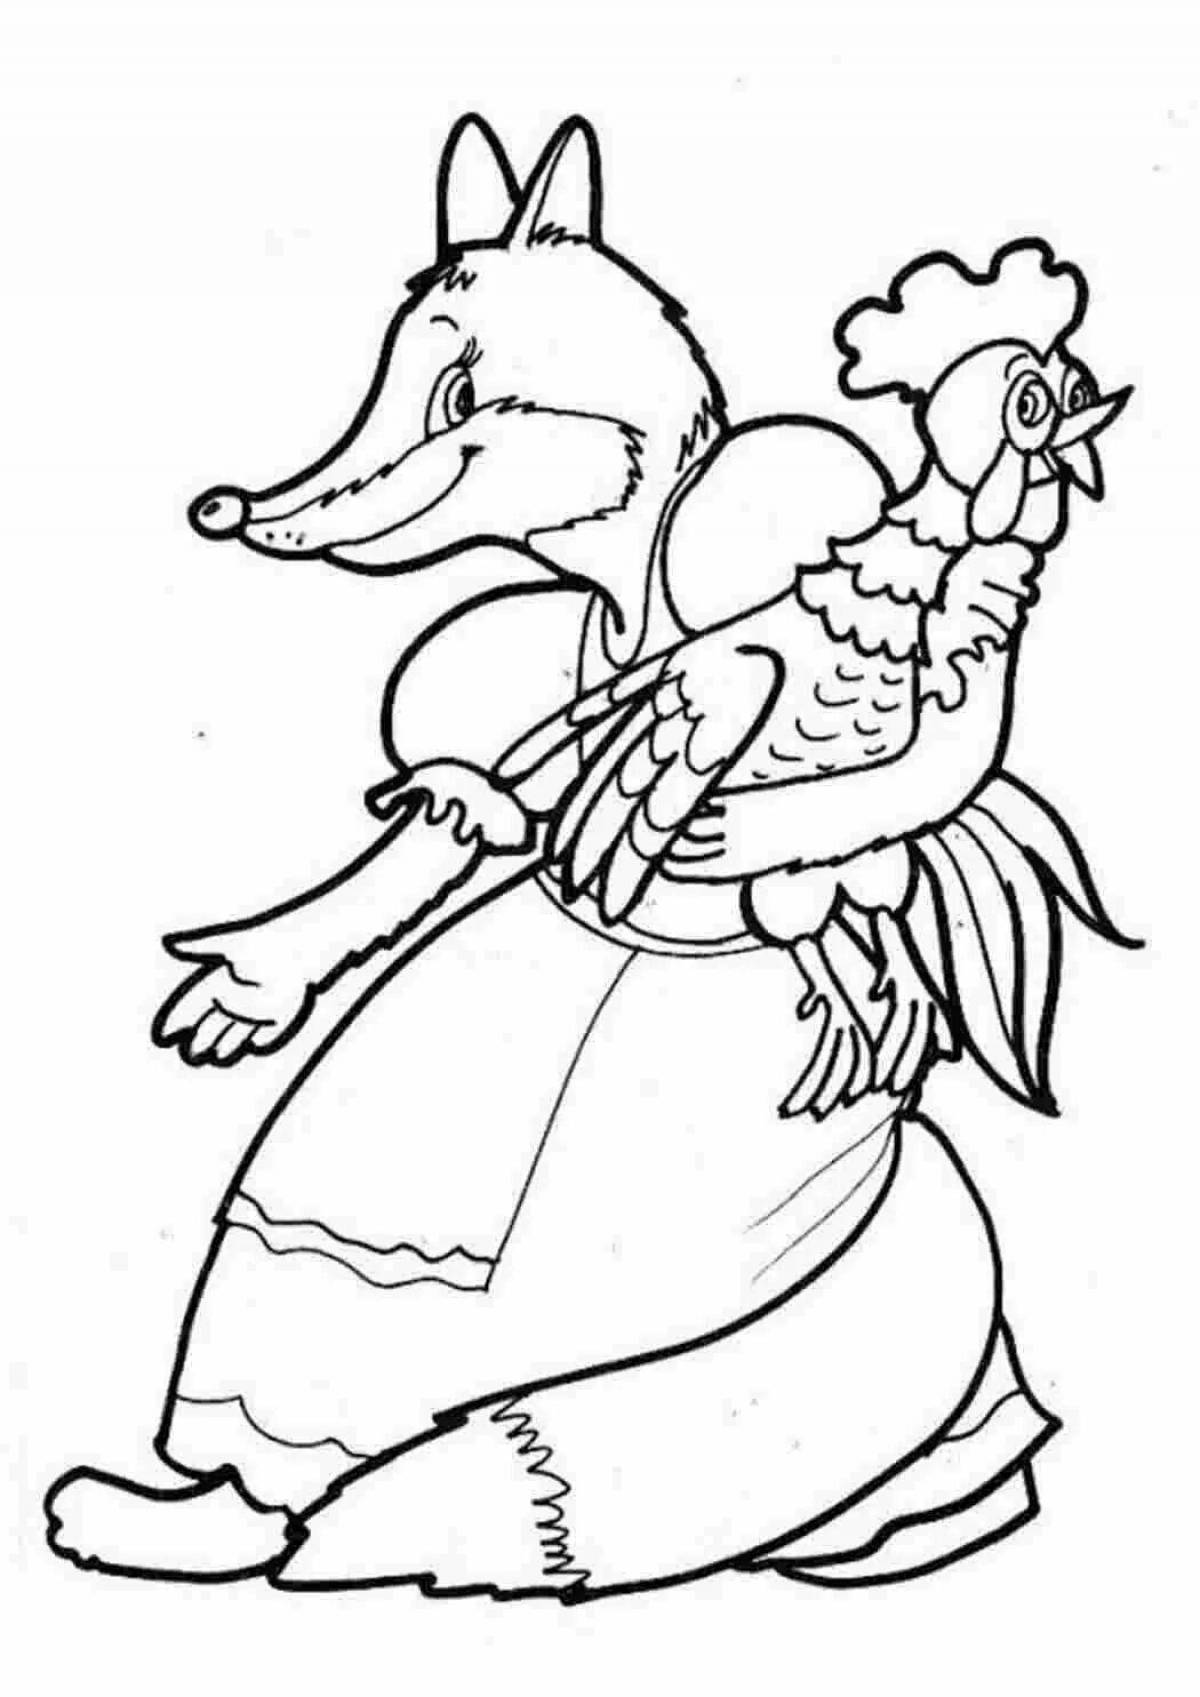 Comic coloring fox and rooster Russian folk tale